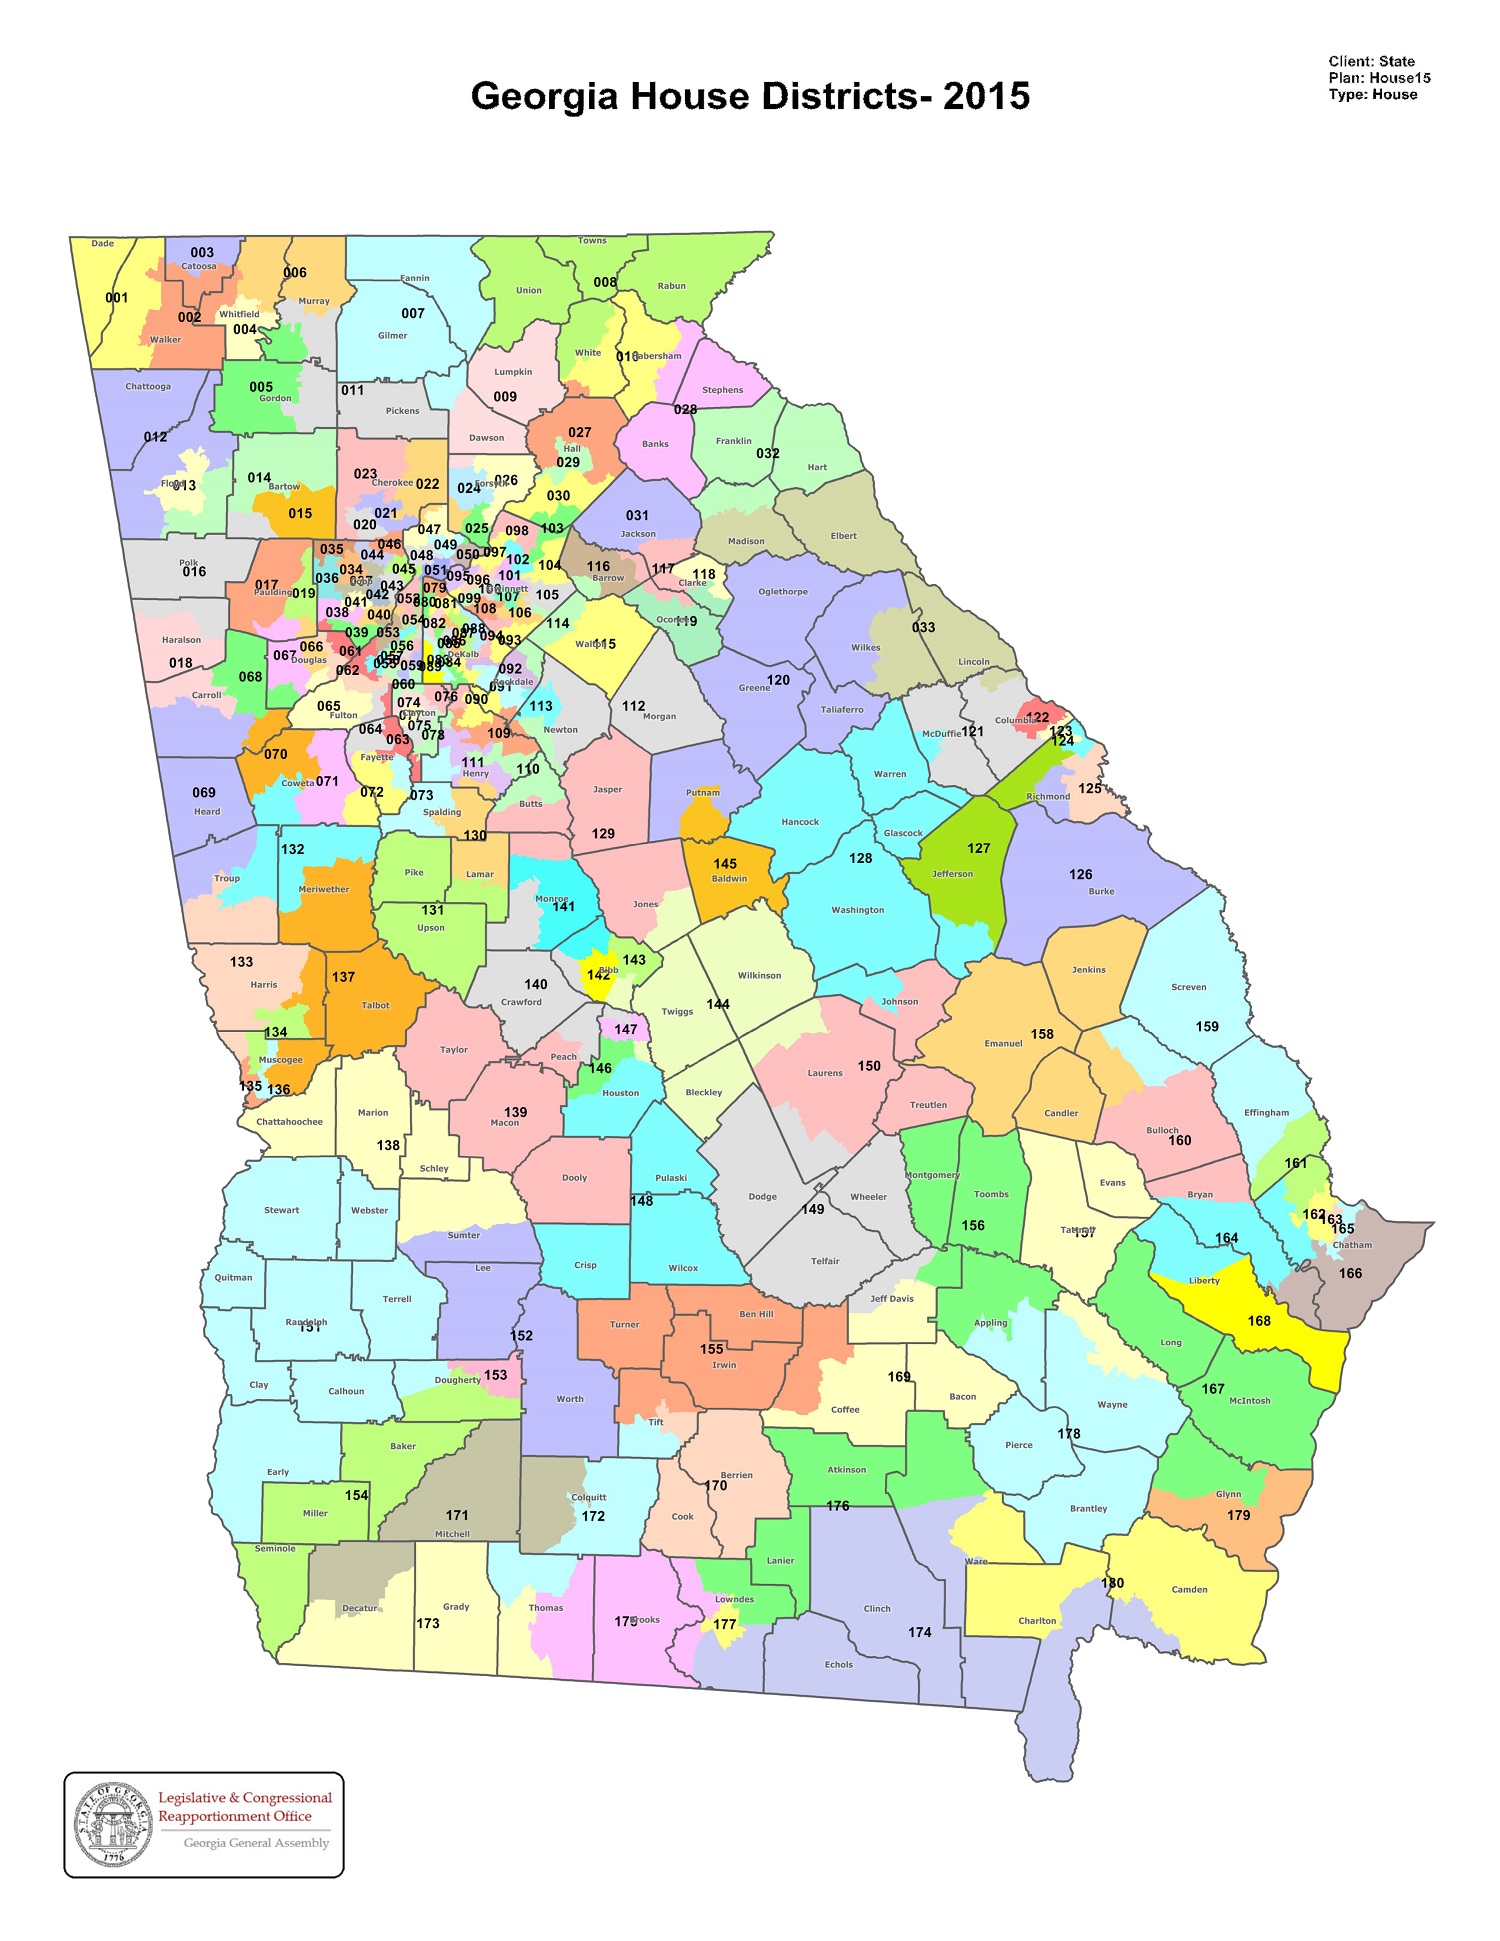 State redistricting information for Georgia